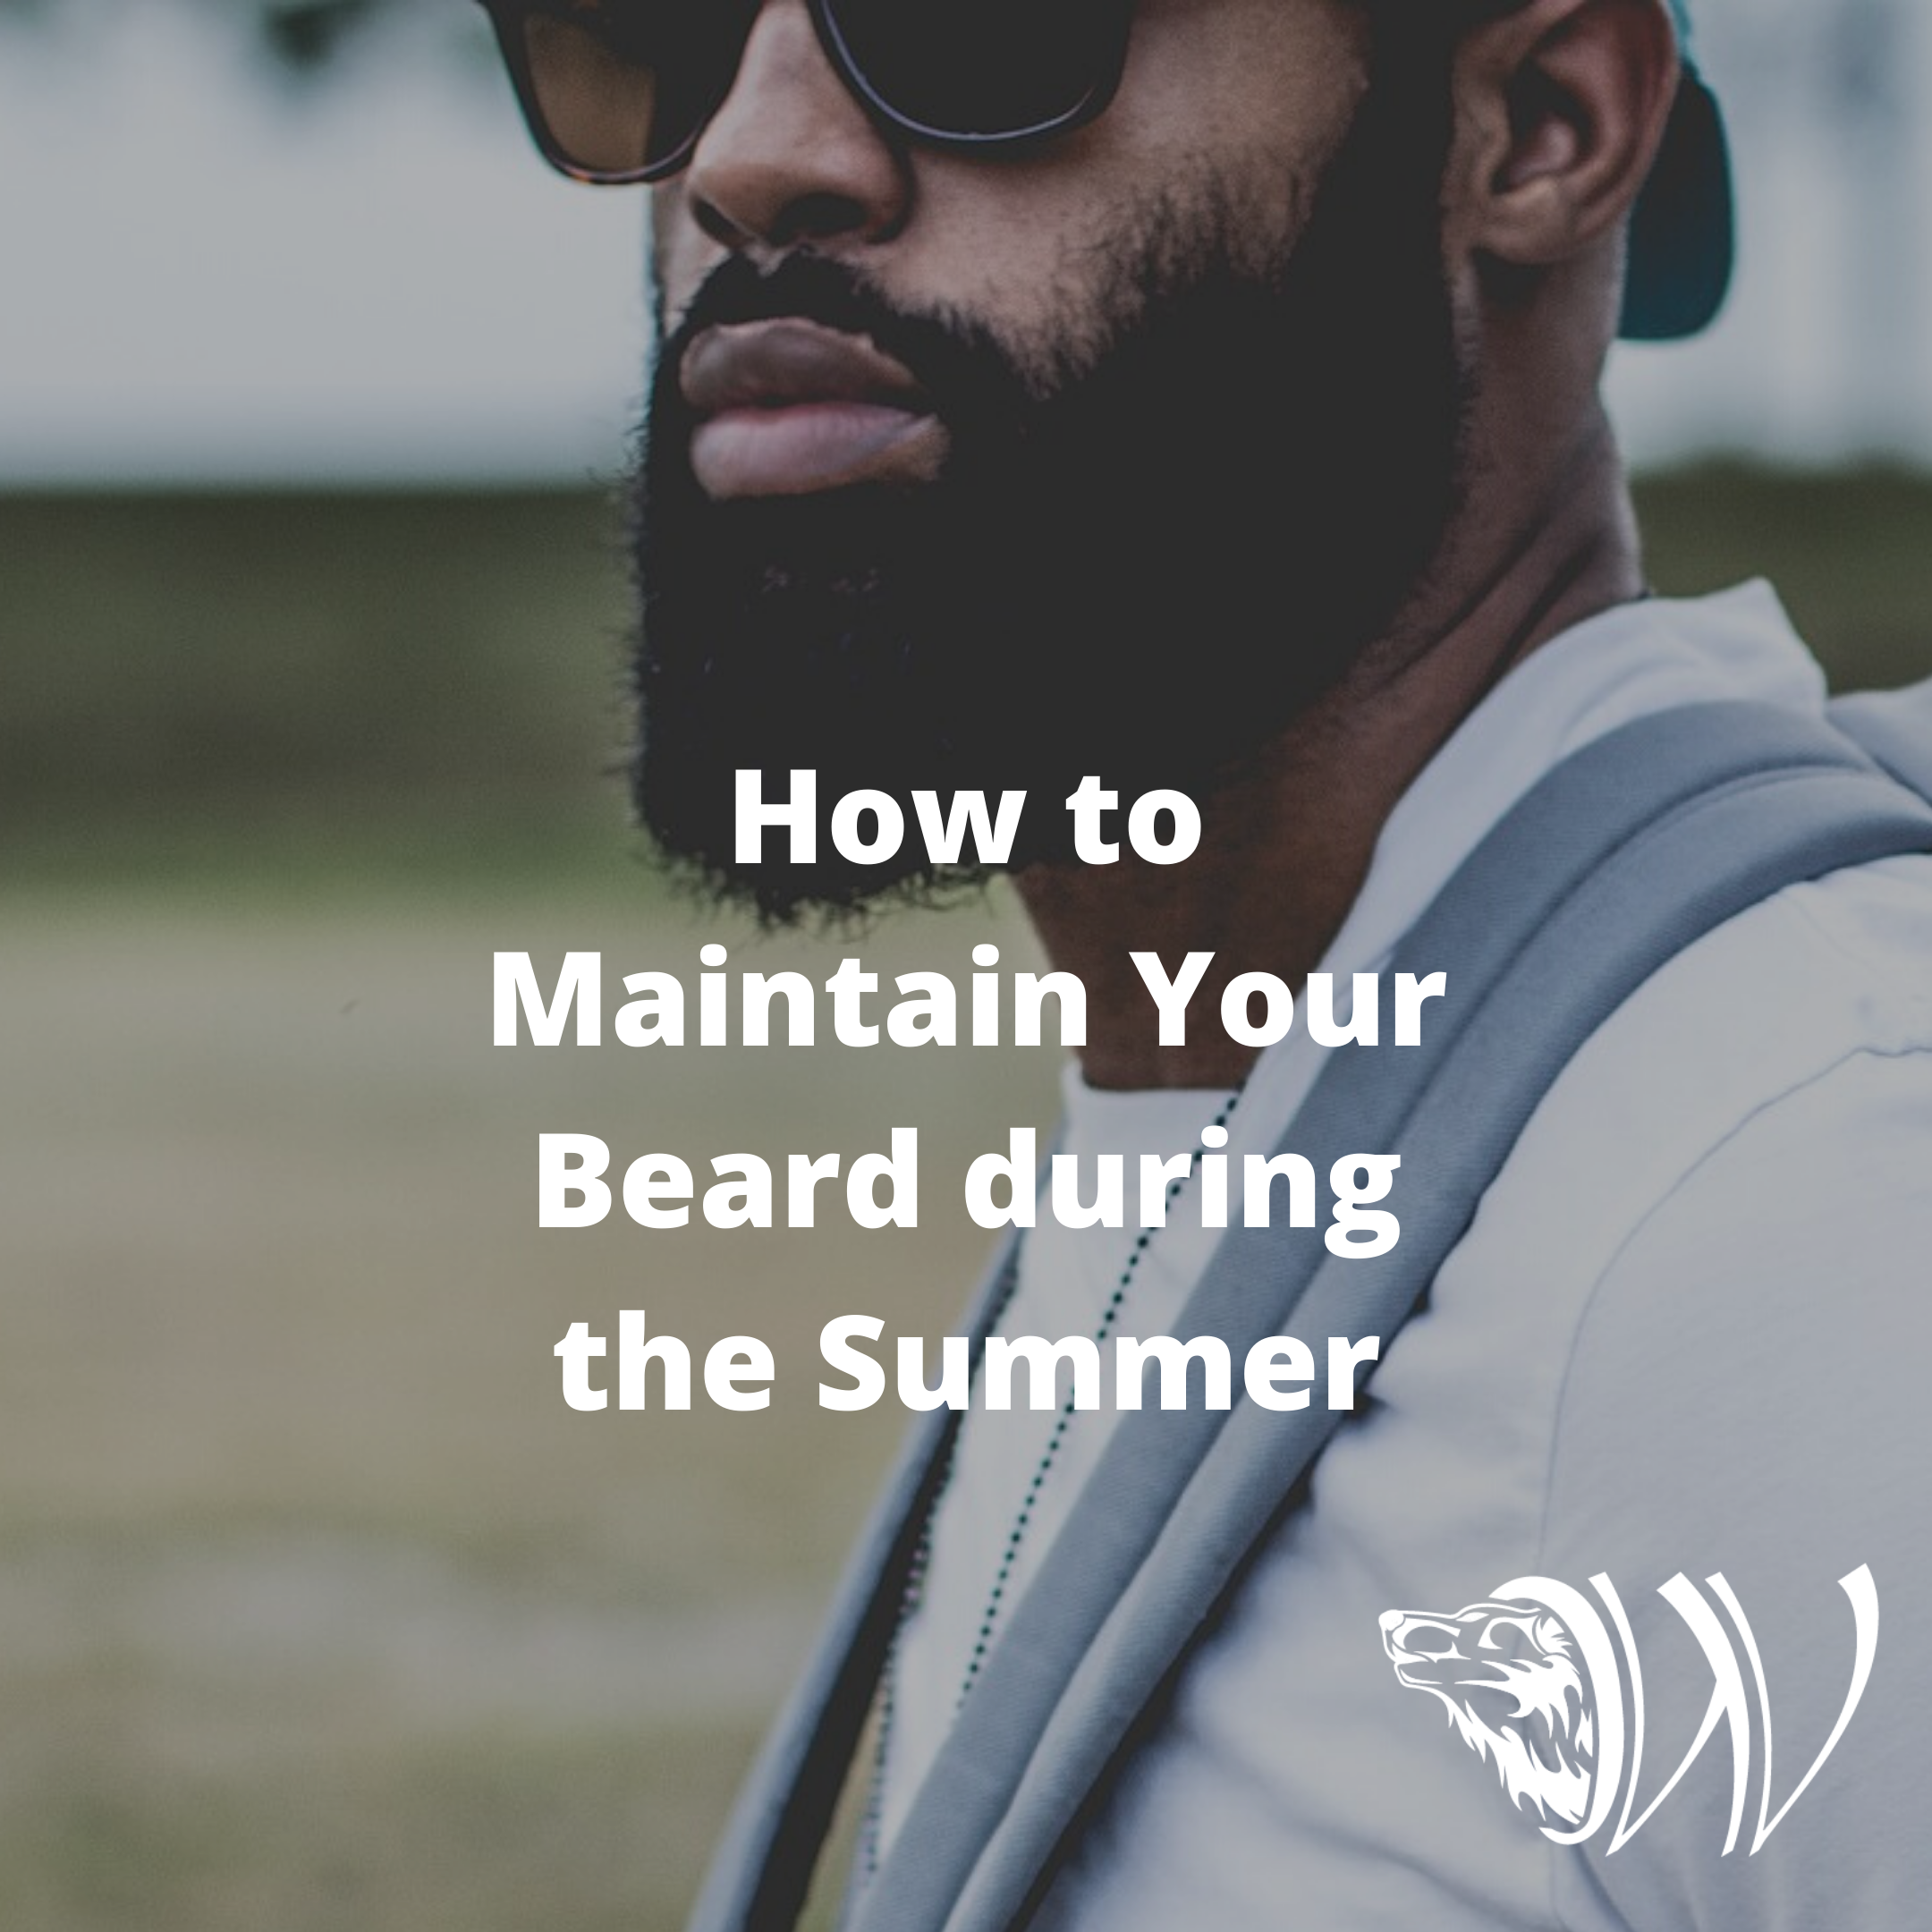 How to Maintain Beard During the Summer